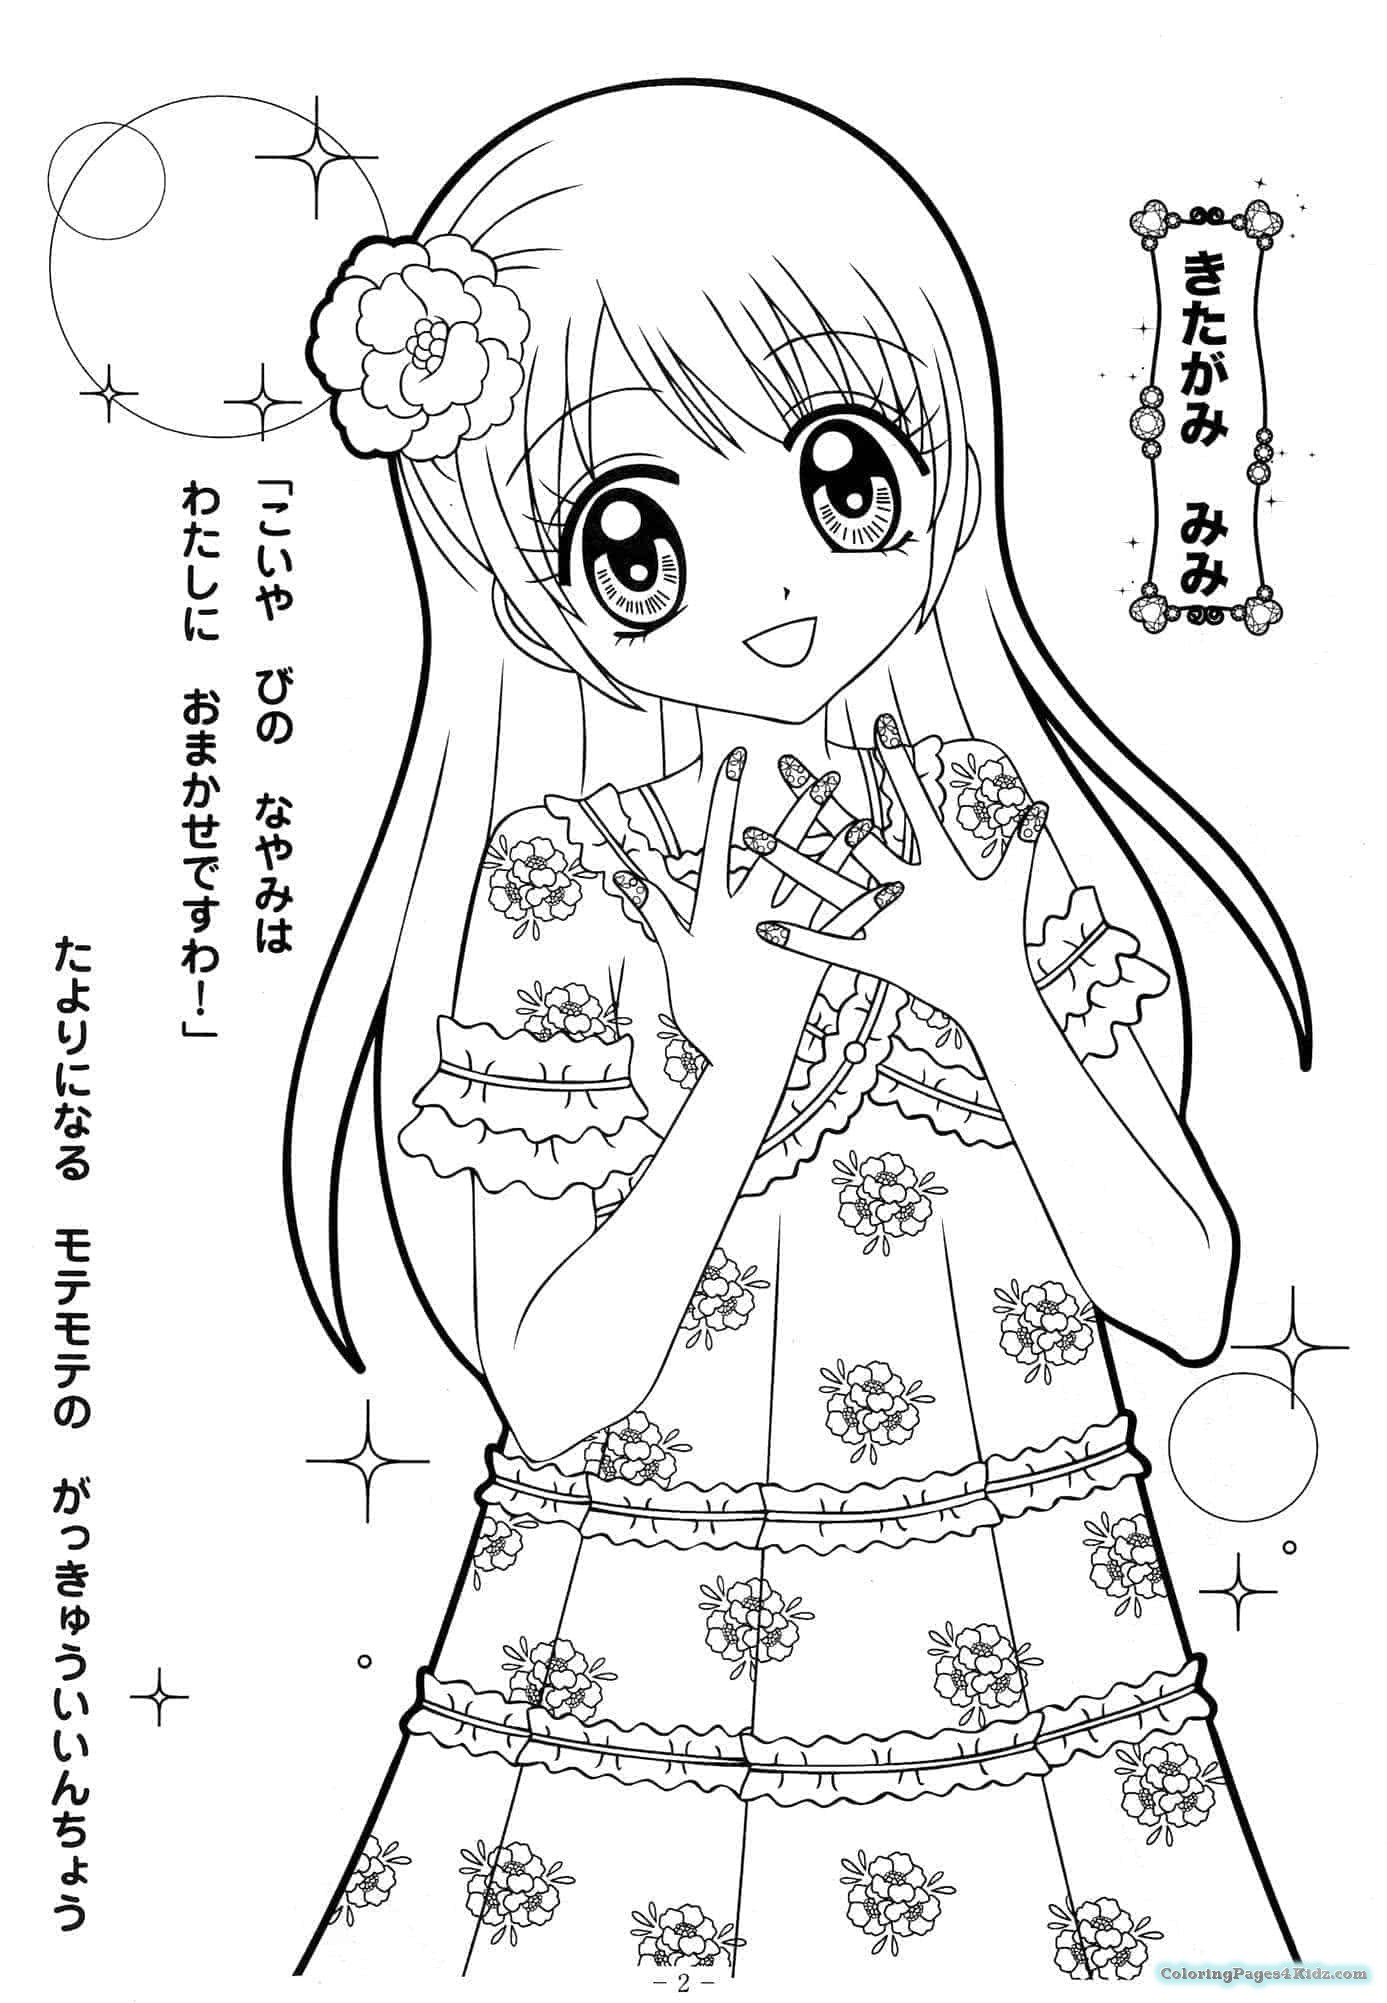 Anime Angel Girl Coloring Pages
 Anime Angel Coloring Pages For Girls